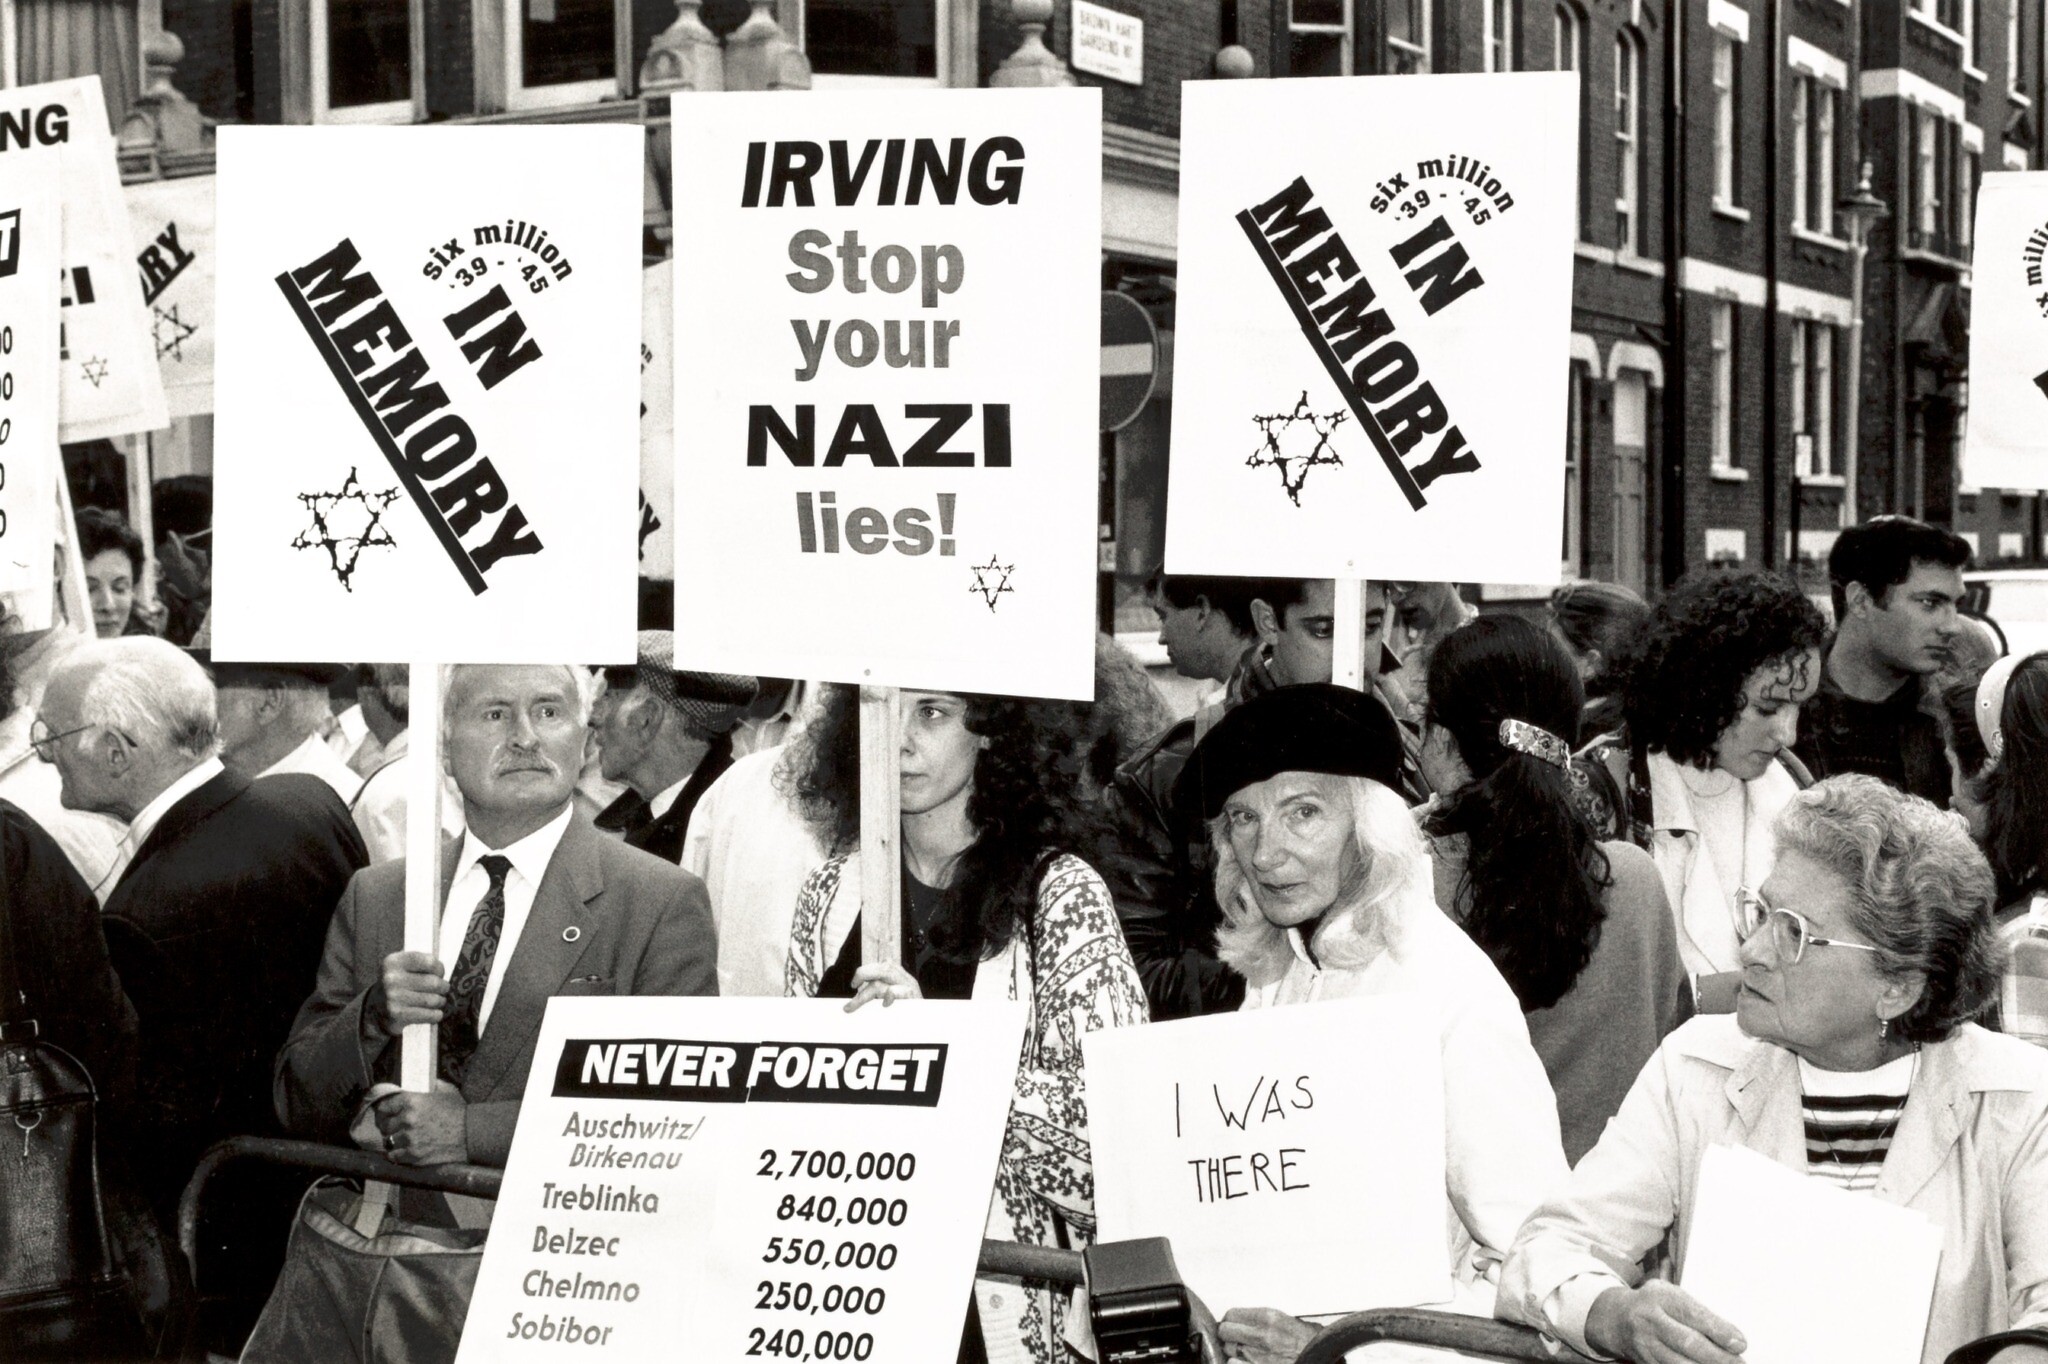 Protests against the work of antisemite and Holocaust denier David Irving, likely in connection to his employment by The Sunday Times, in the UK, 1992. (Courtesy Community Security Trust)